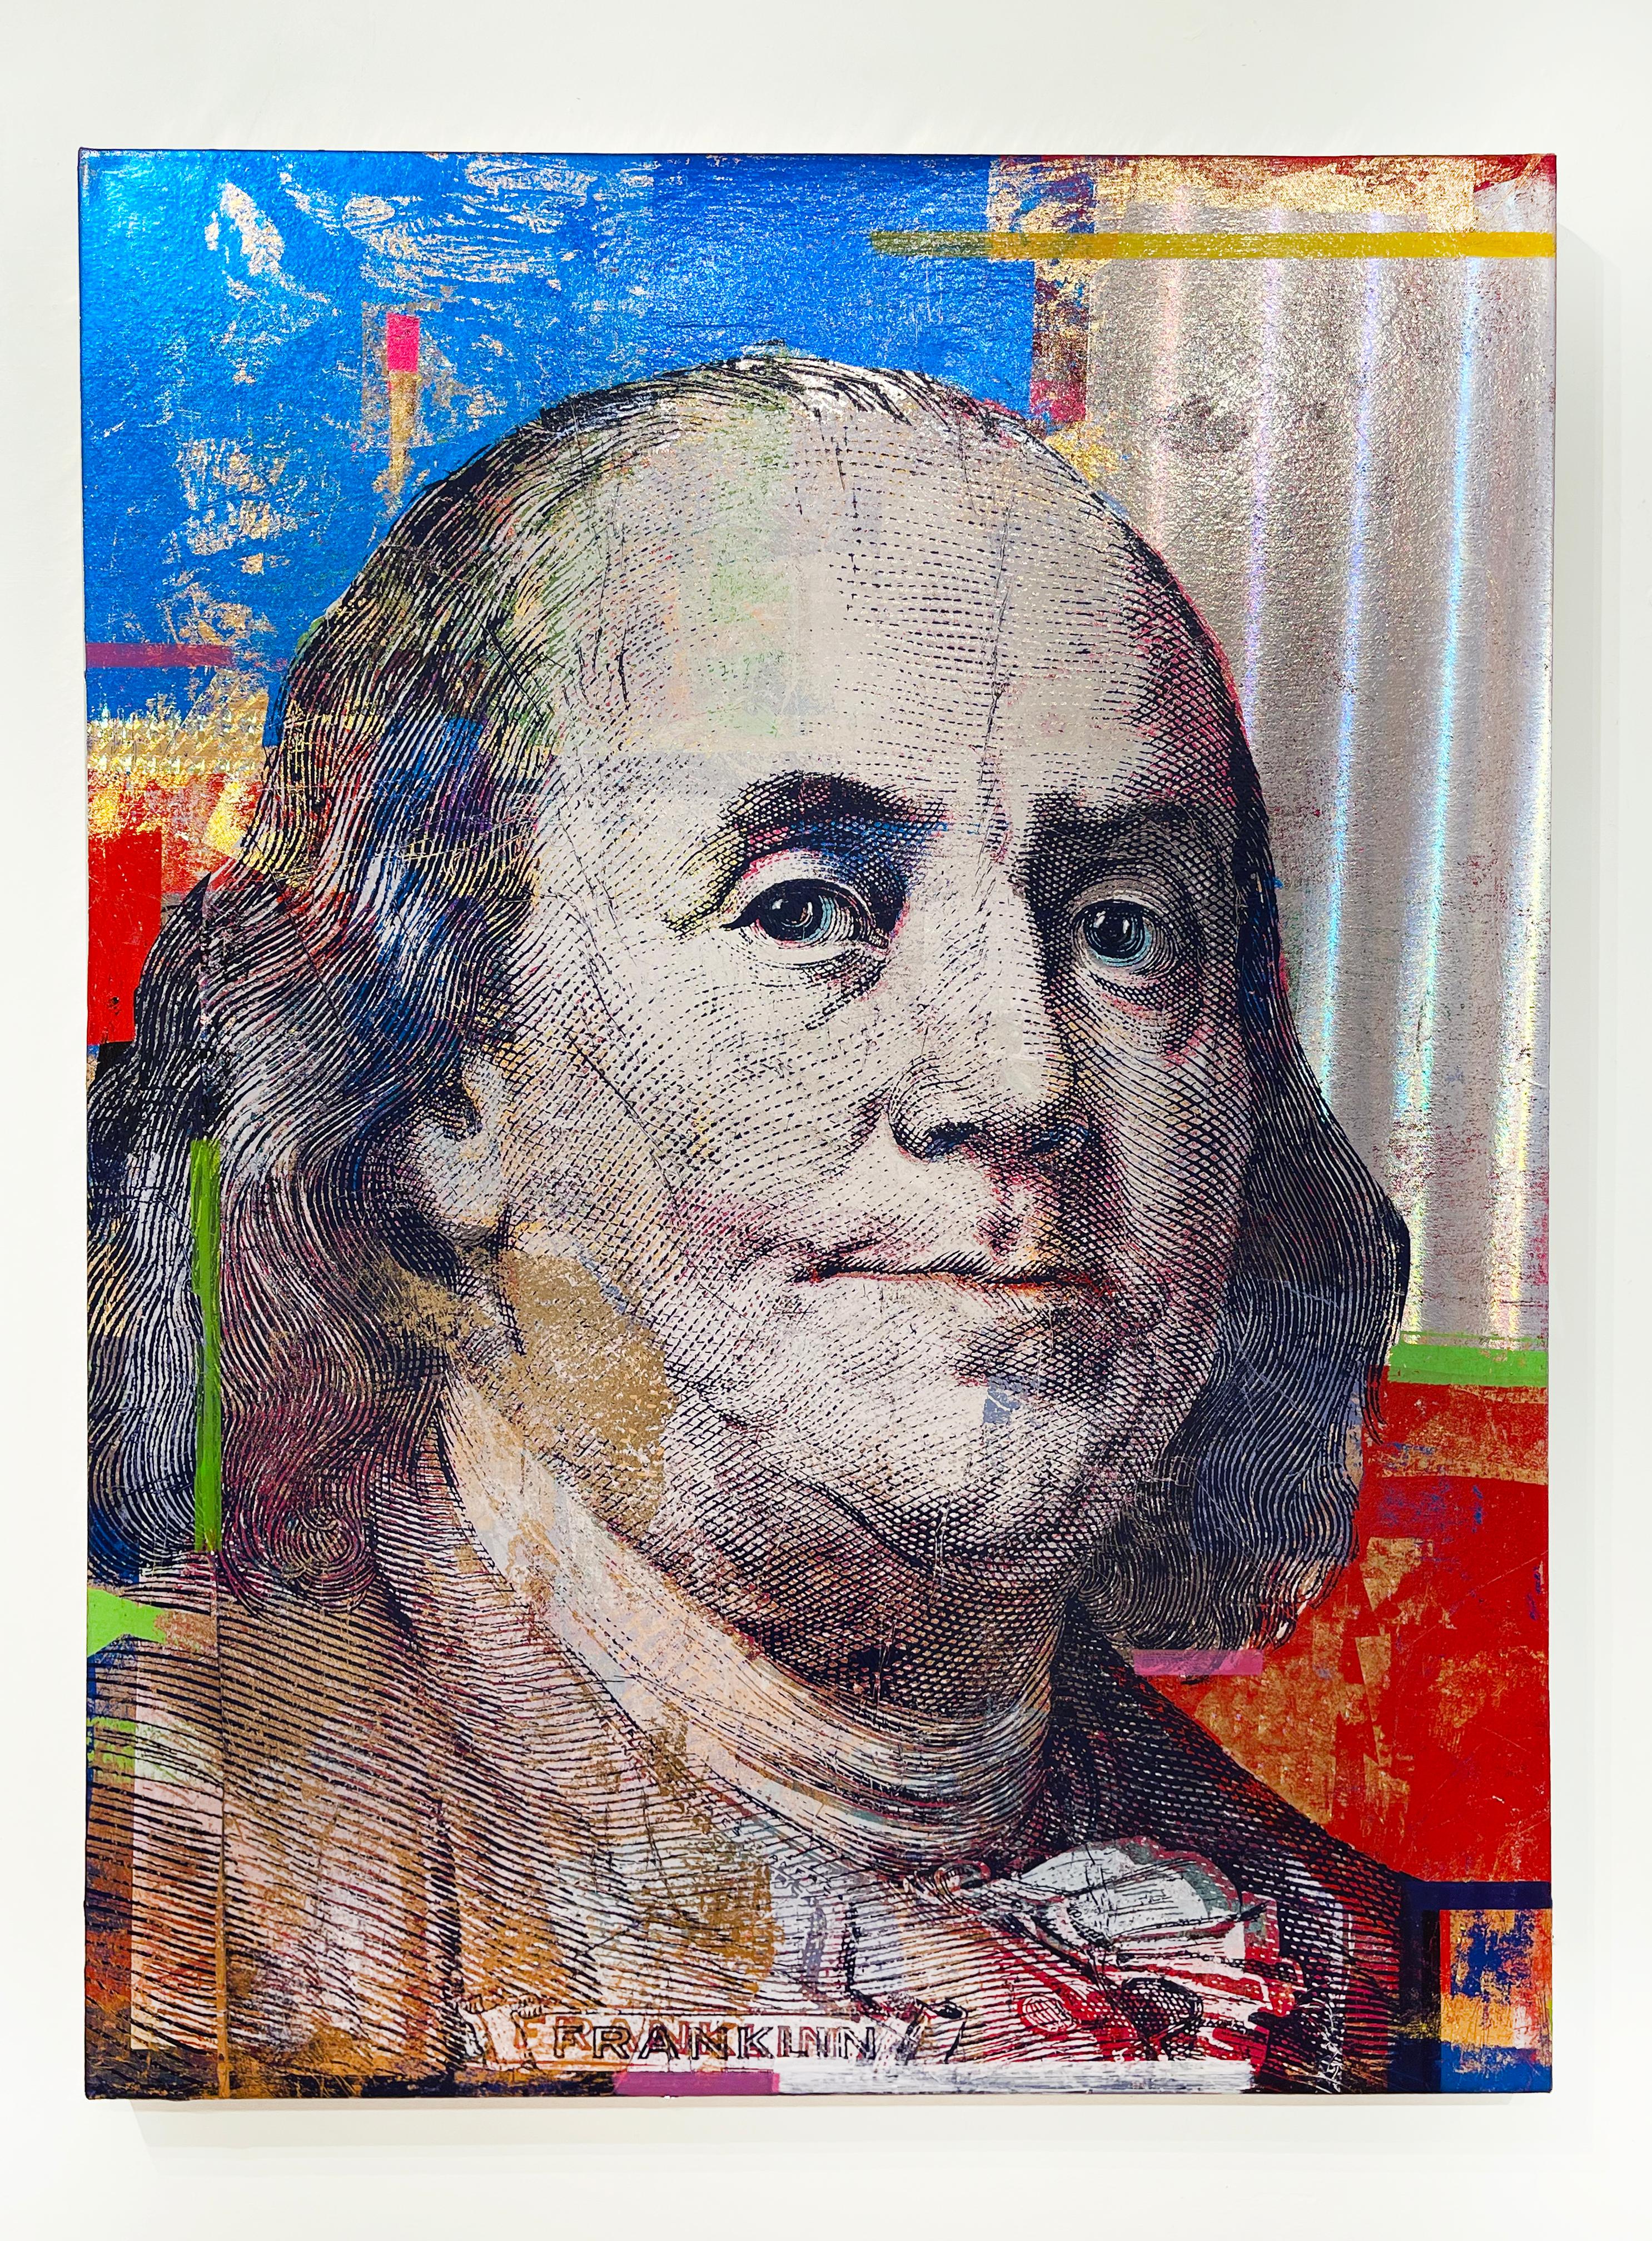 100 Dollars Ben Franklin - Painting by Houben R.T.